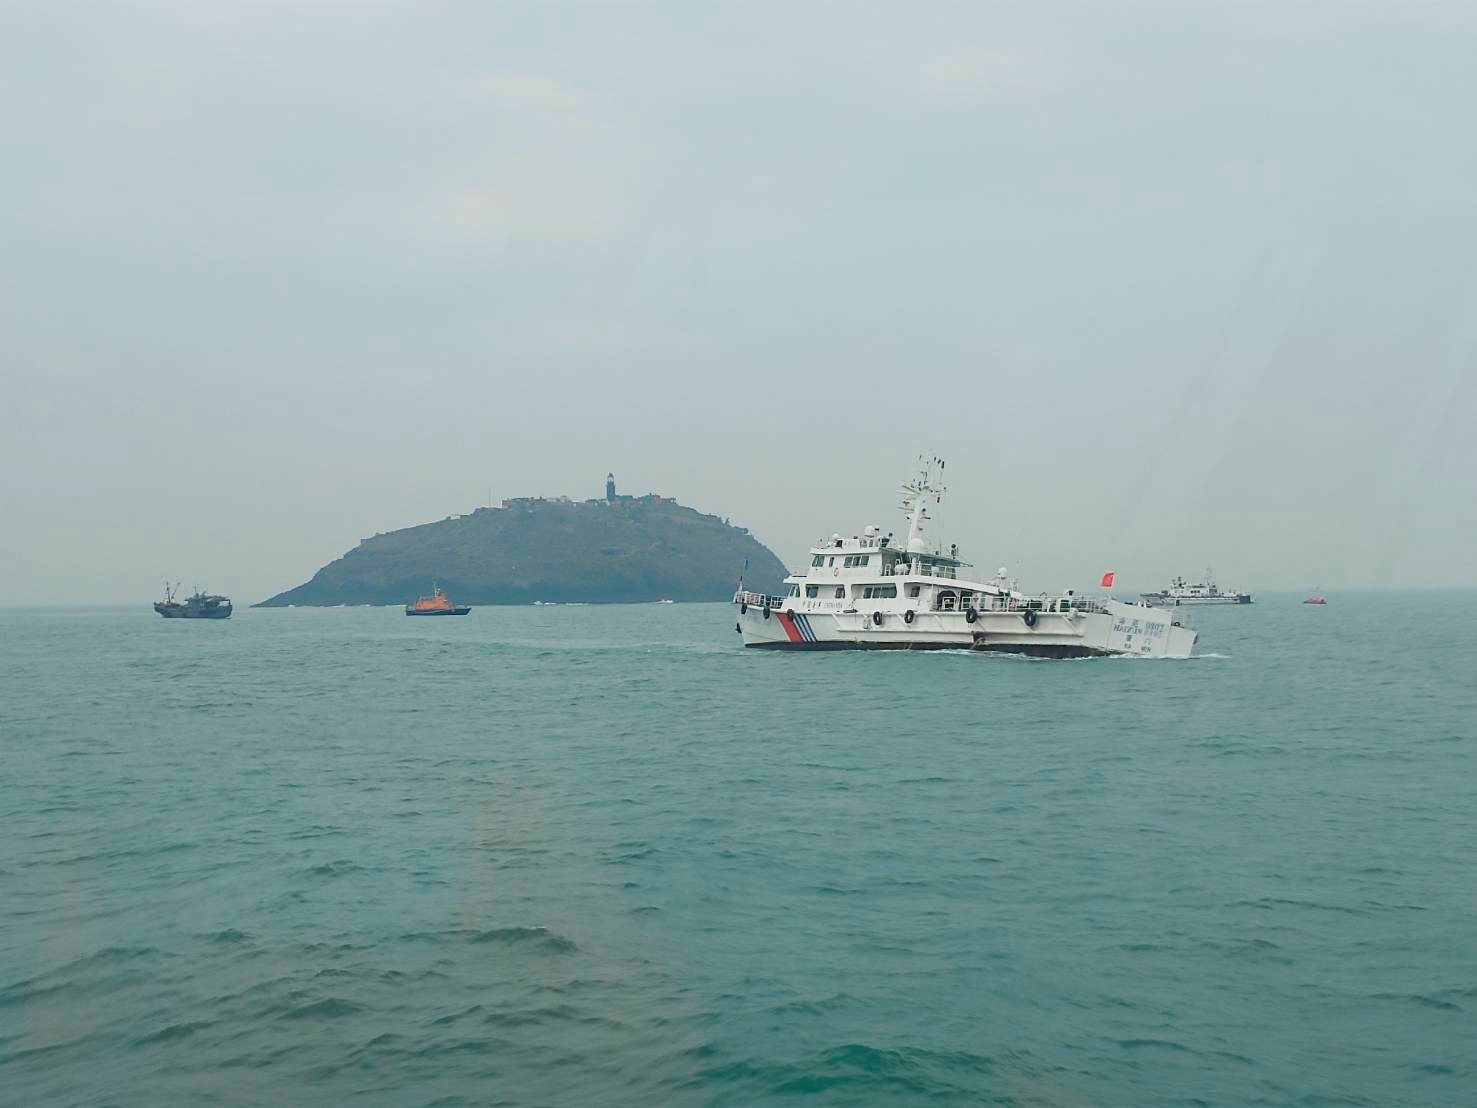 Taiwan’s coast guard works during a rescue operation after a Chinese fishing boat capsized near Taiwan-controlled Kinmen islands. Photo: Handout via Reuters